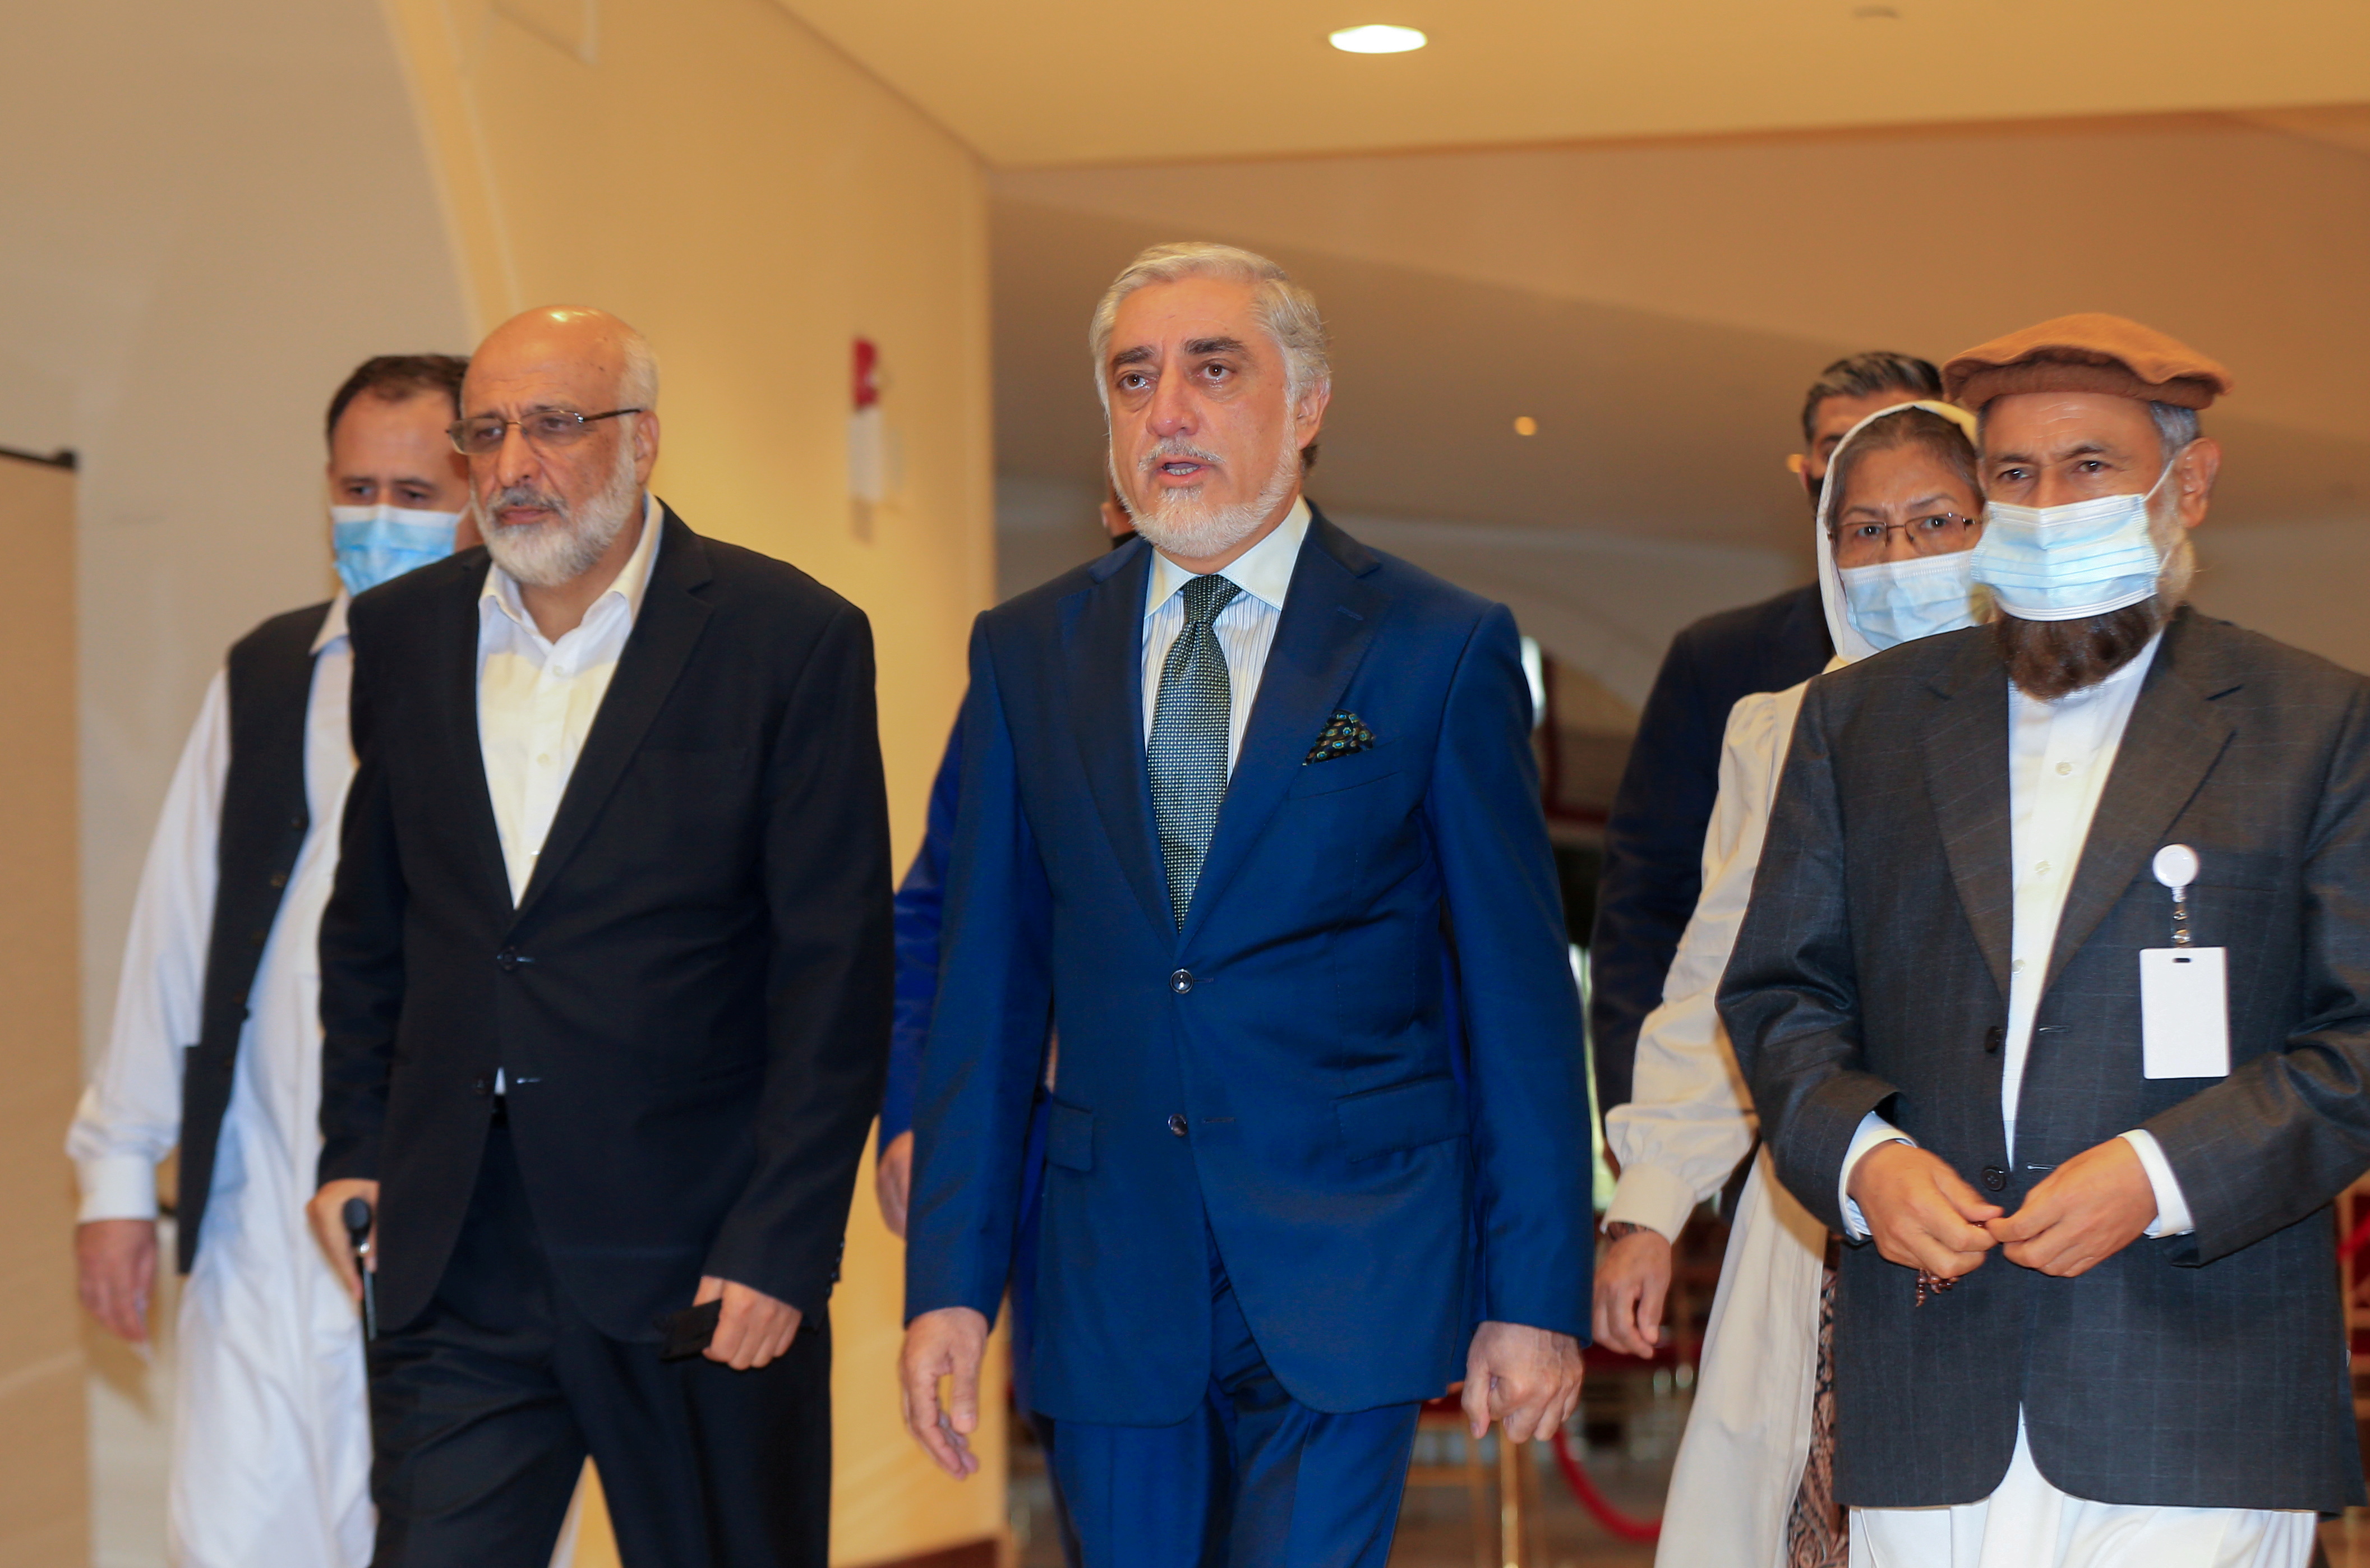 Abdullah Abdullah, the Chairman of Afghanistan's High Council for National Reconciliation, arrives for Afghan peace talks in Doha